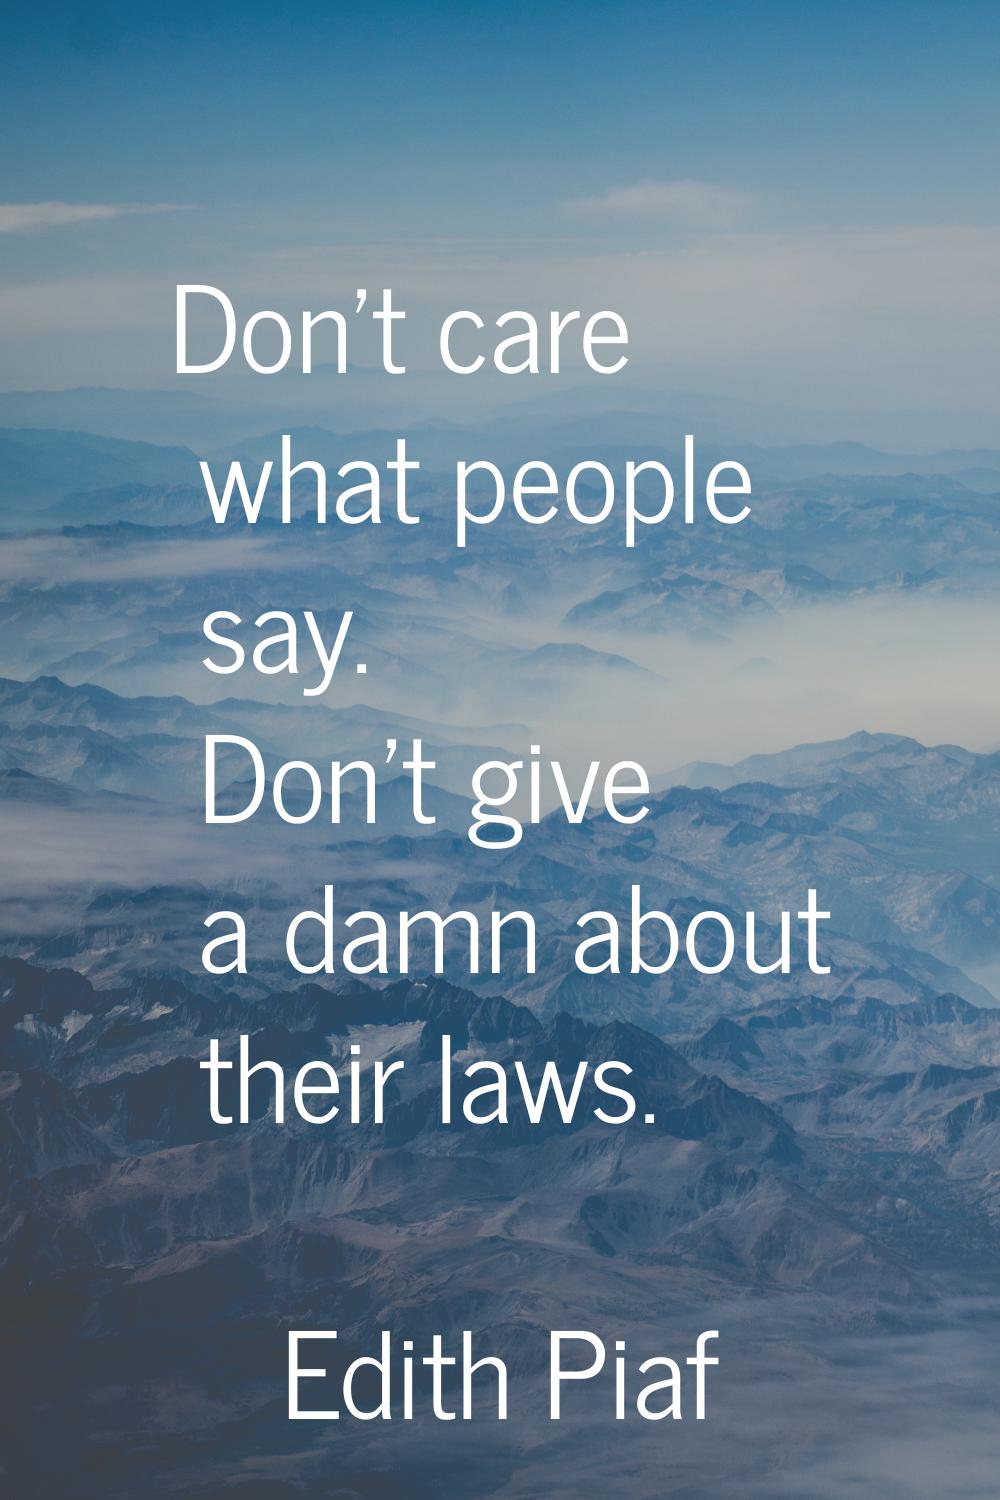 Don't care what people say. Don't give a damn about their laws.